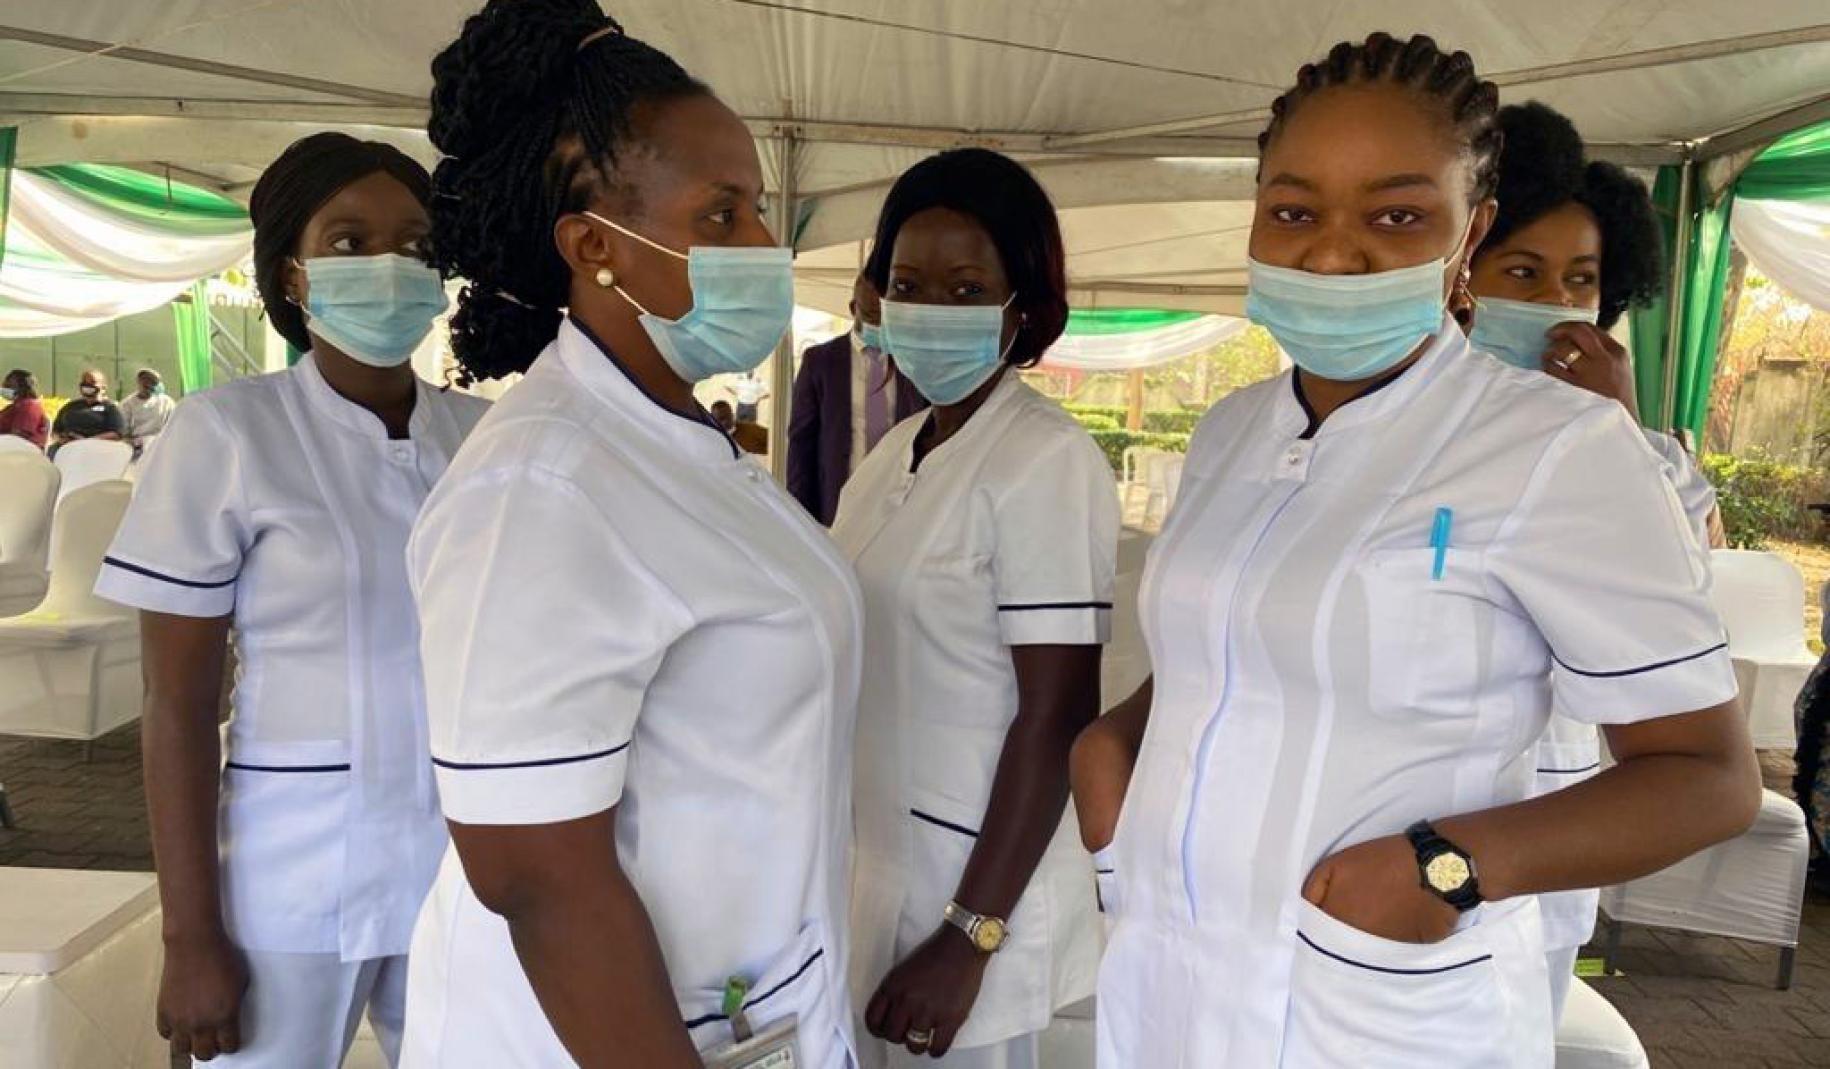 Healthcare workers wearing face masks stand together underneath a tent.